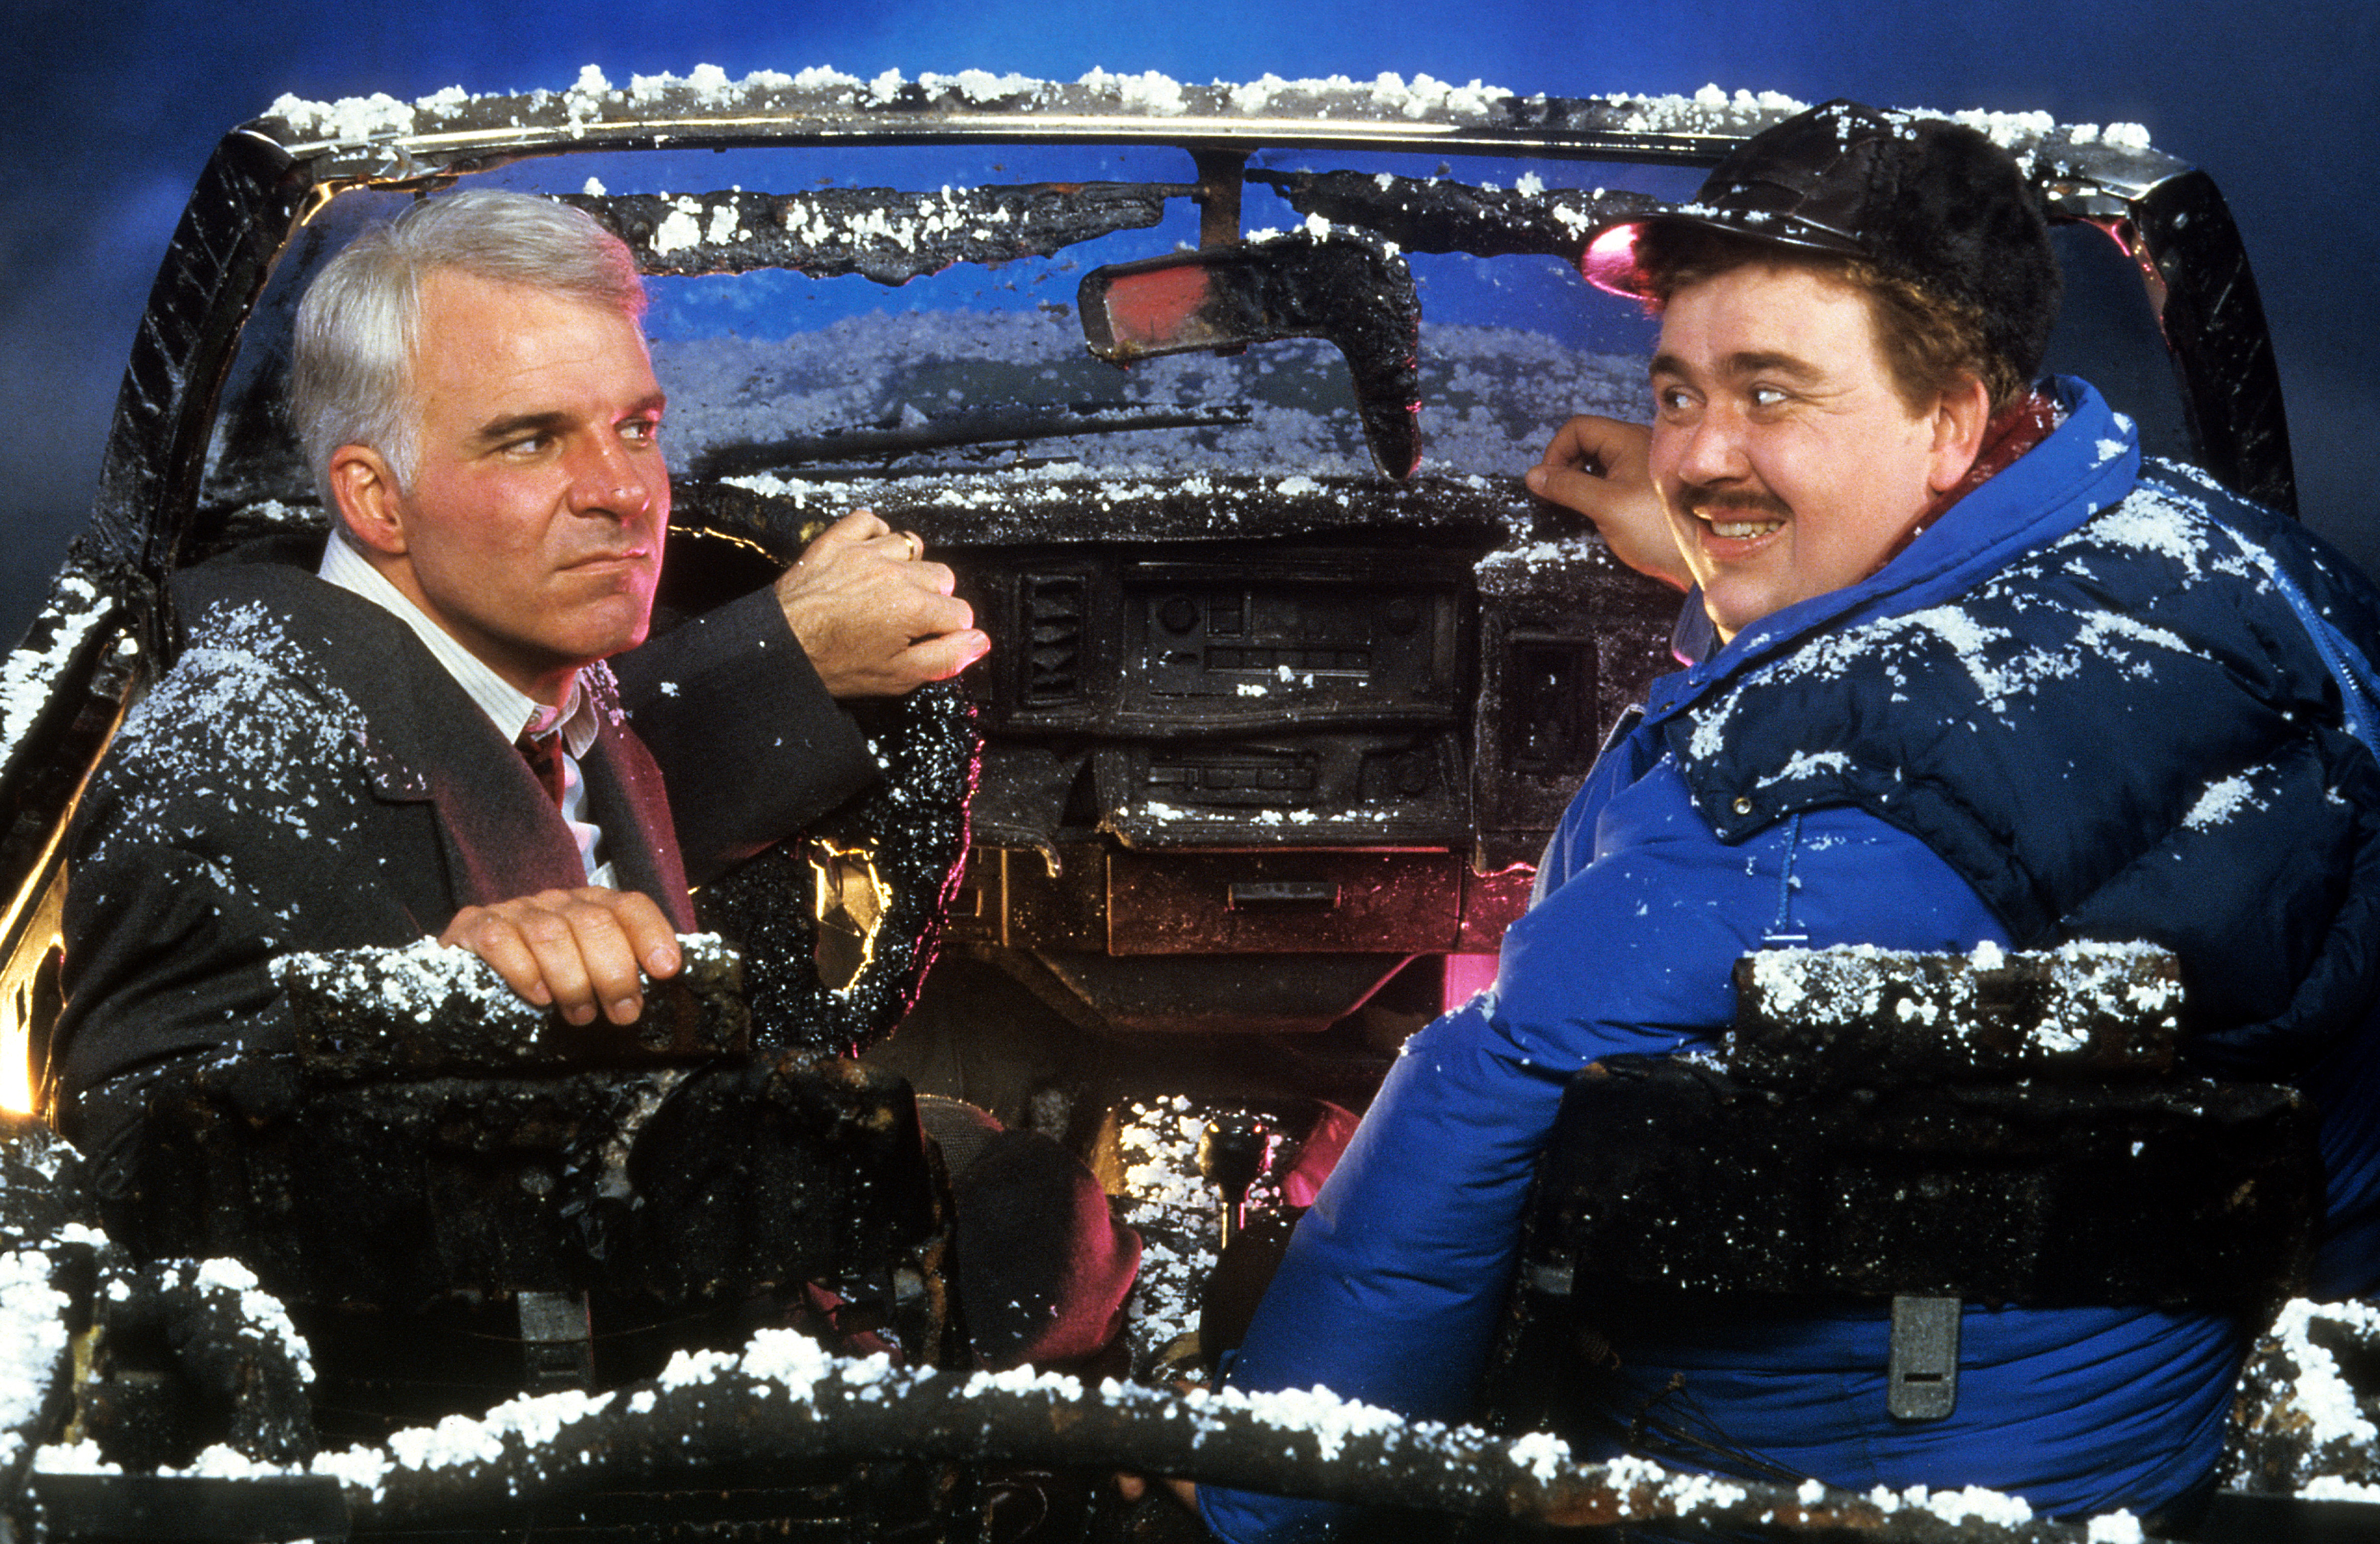 Steve Martin and John Candy sit in a destroyed car in a scene from the film "Planes, Trains & Automobiles", 1987. | Source: Getty Images